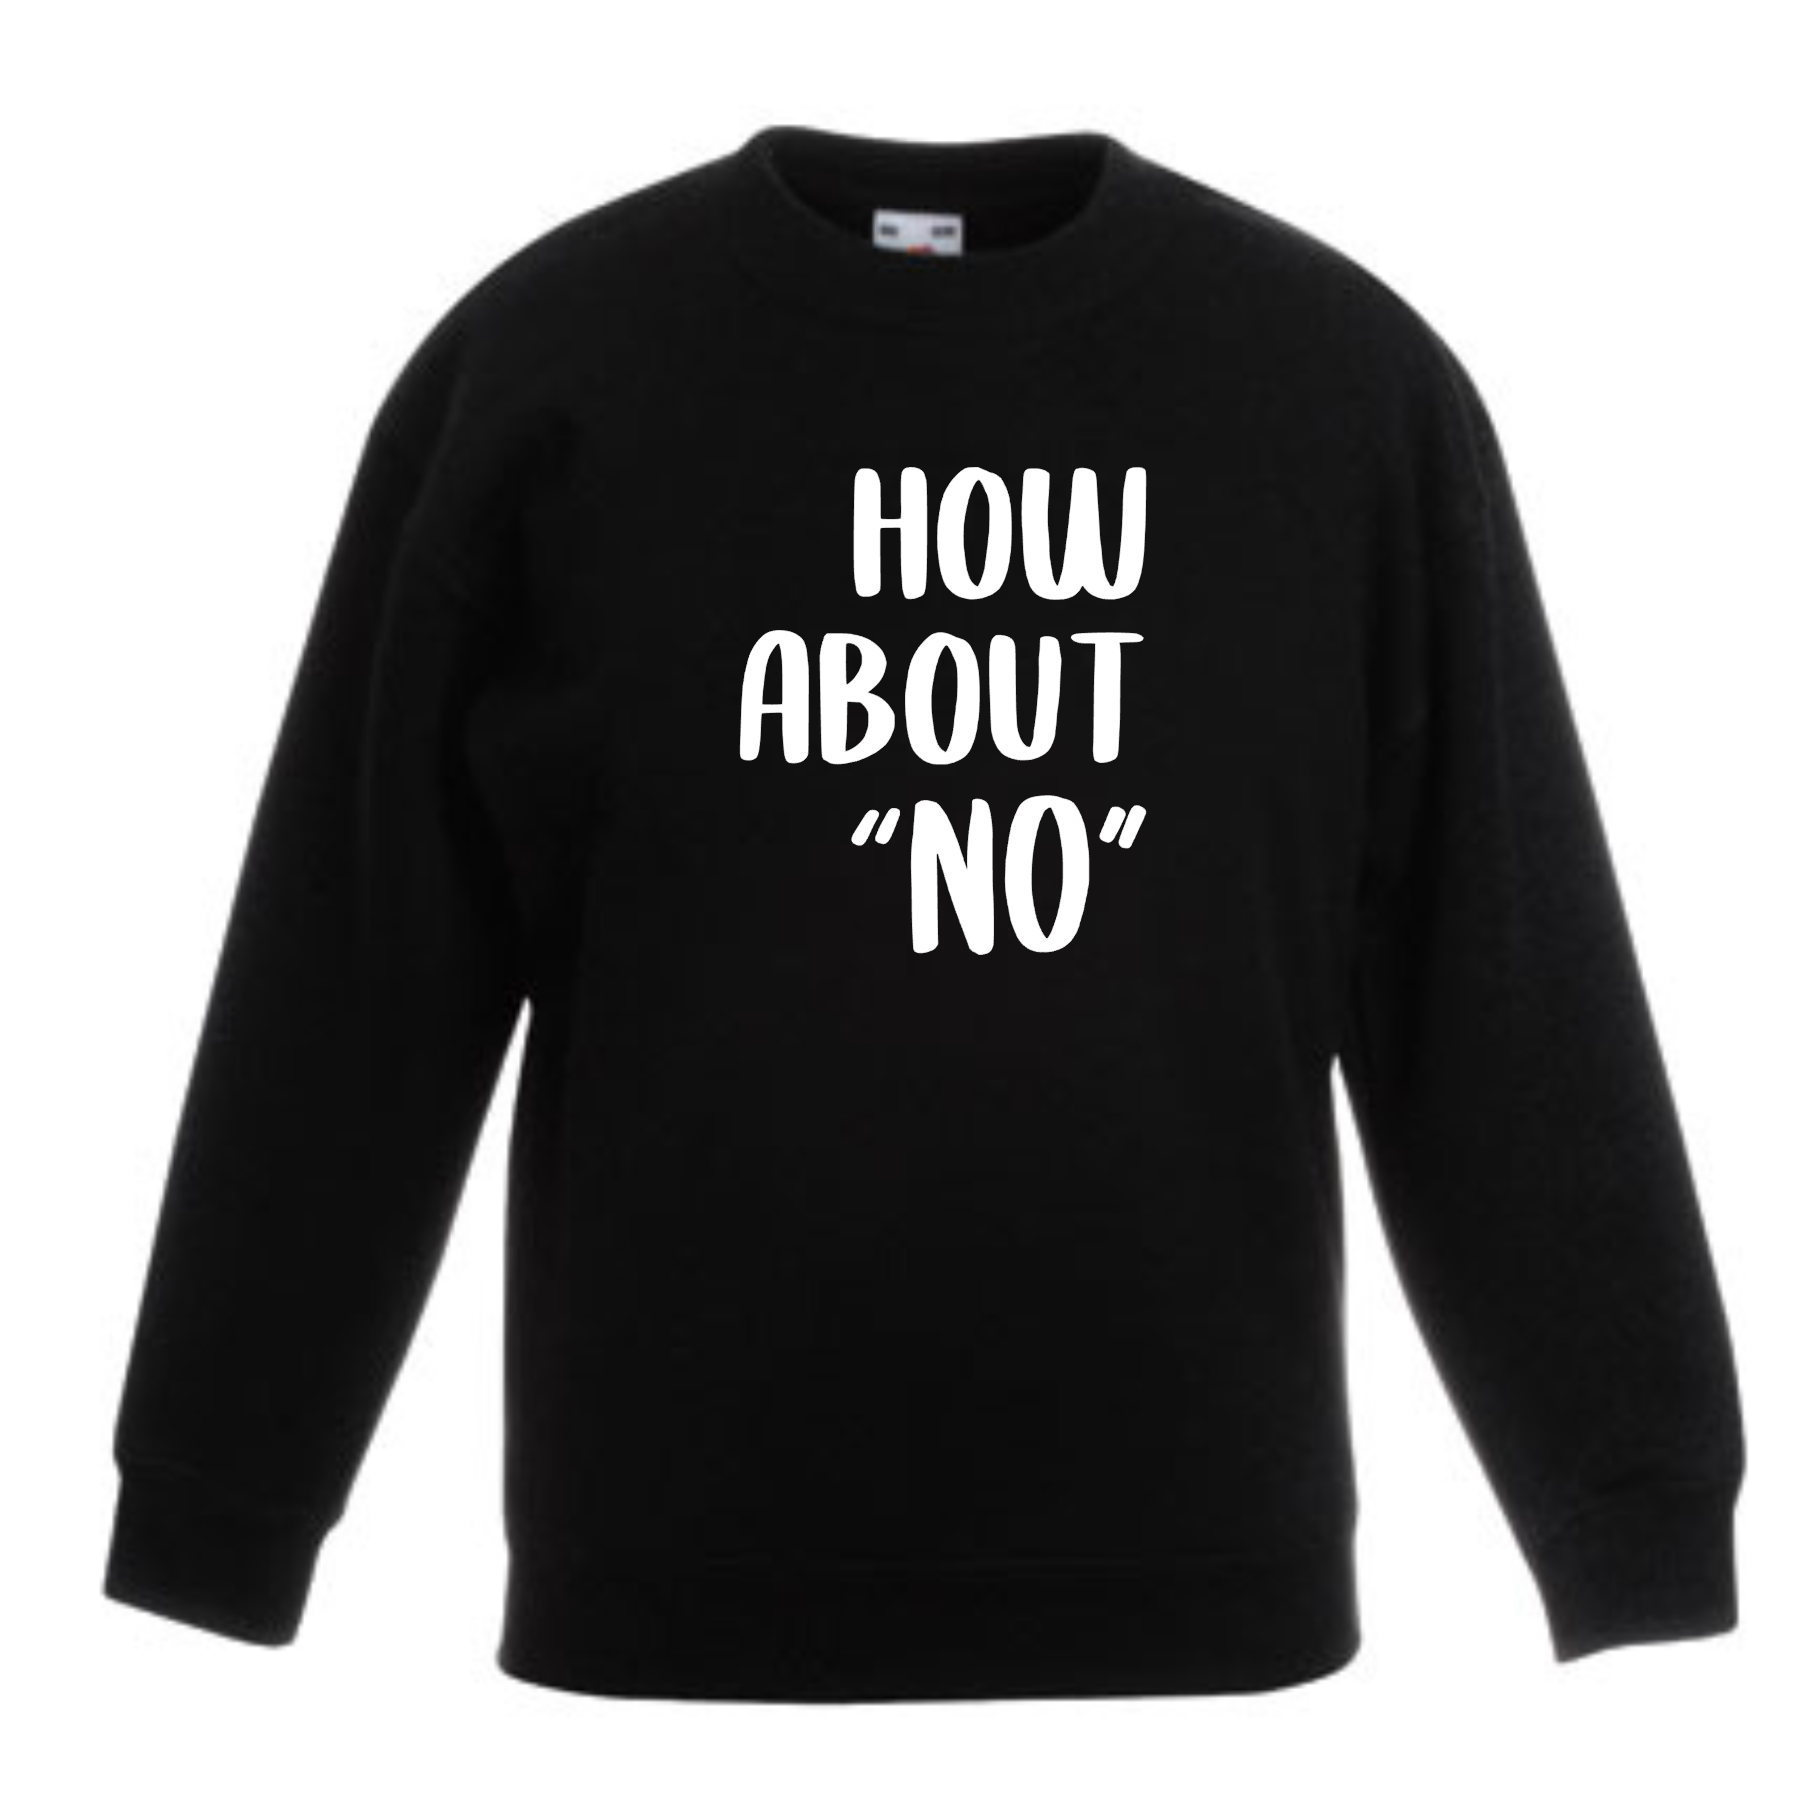 Kids sweater | How about “no”